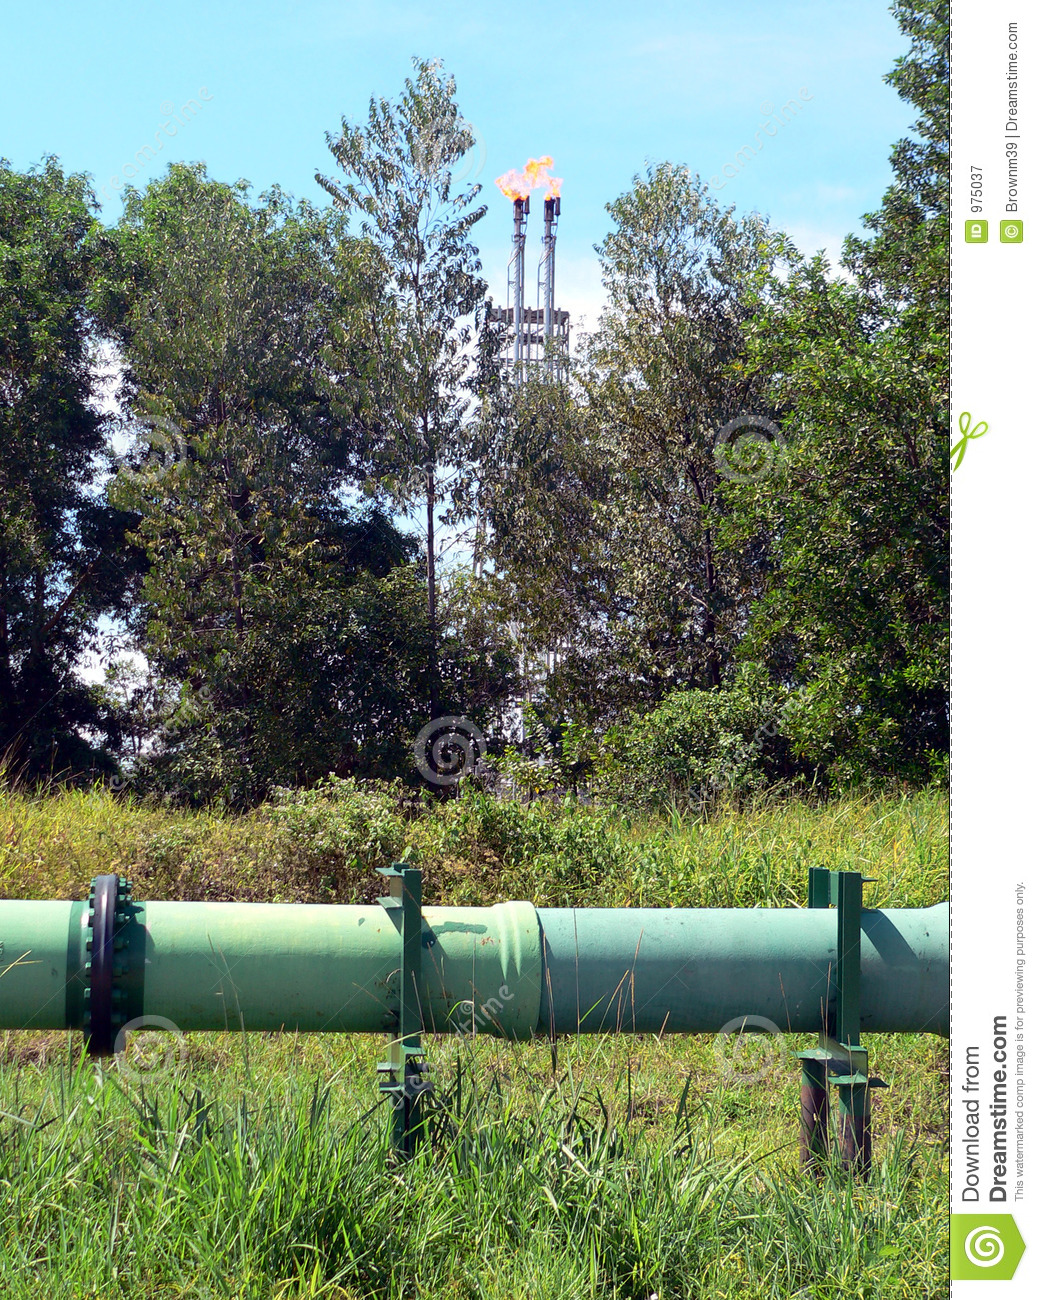 Brunei  Crude Oil Refinery   Pipeline Royalty Free Stock Photography